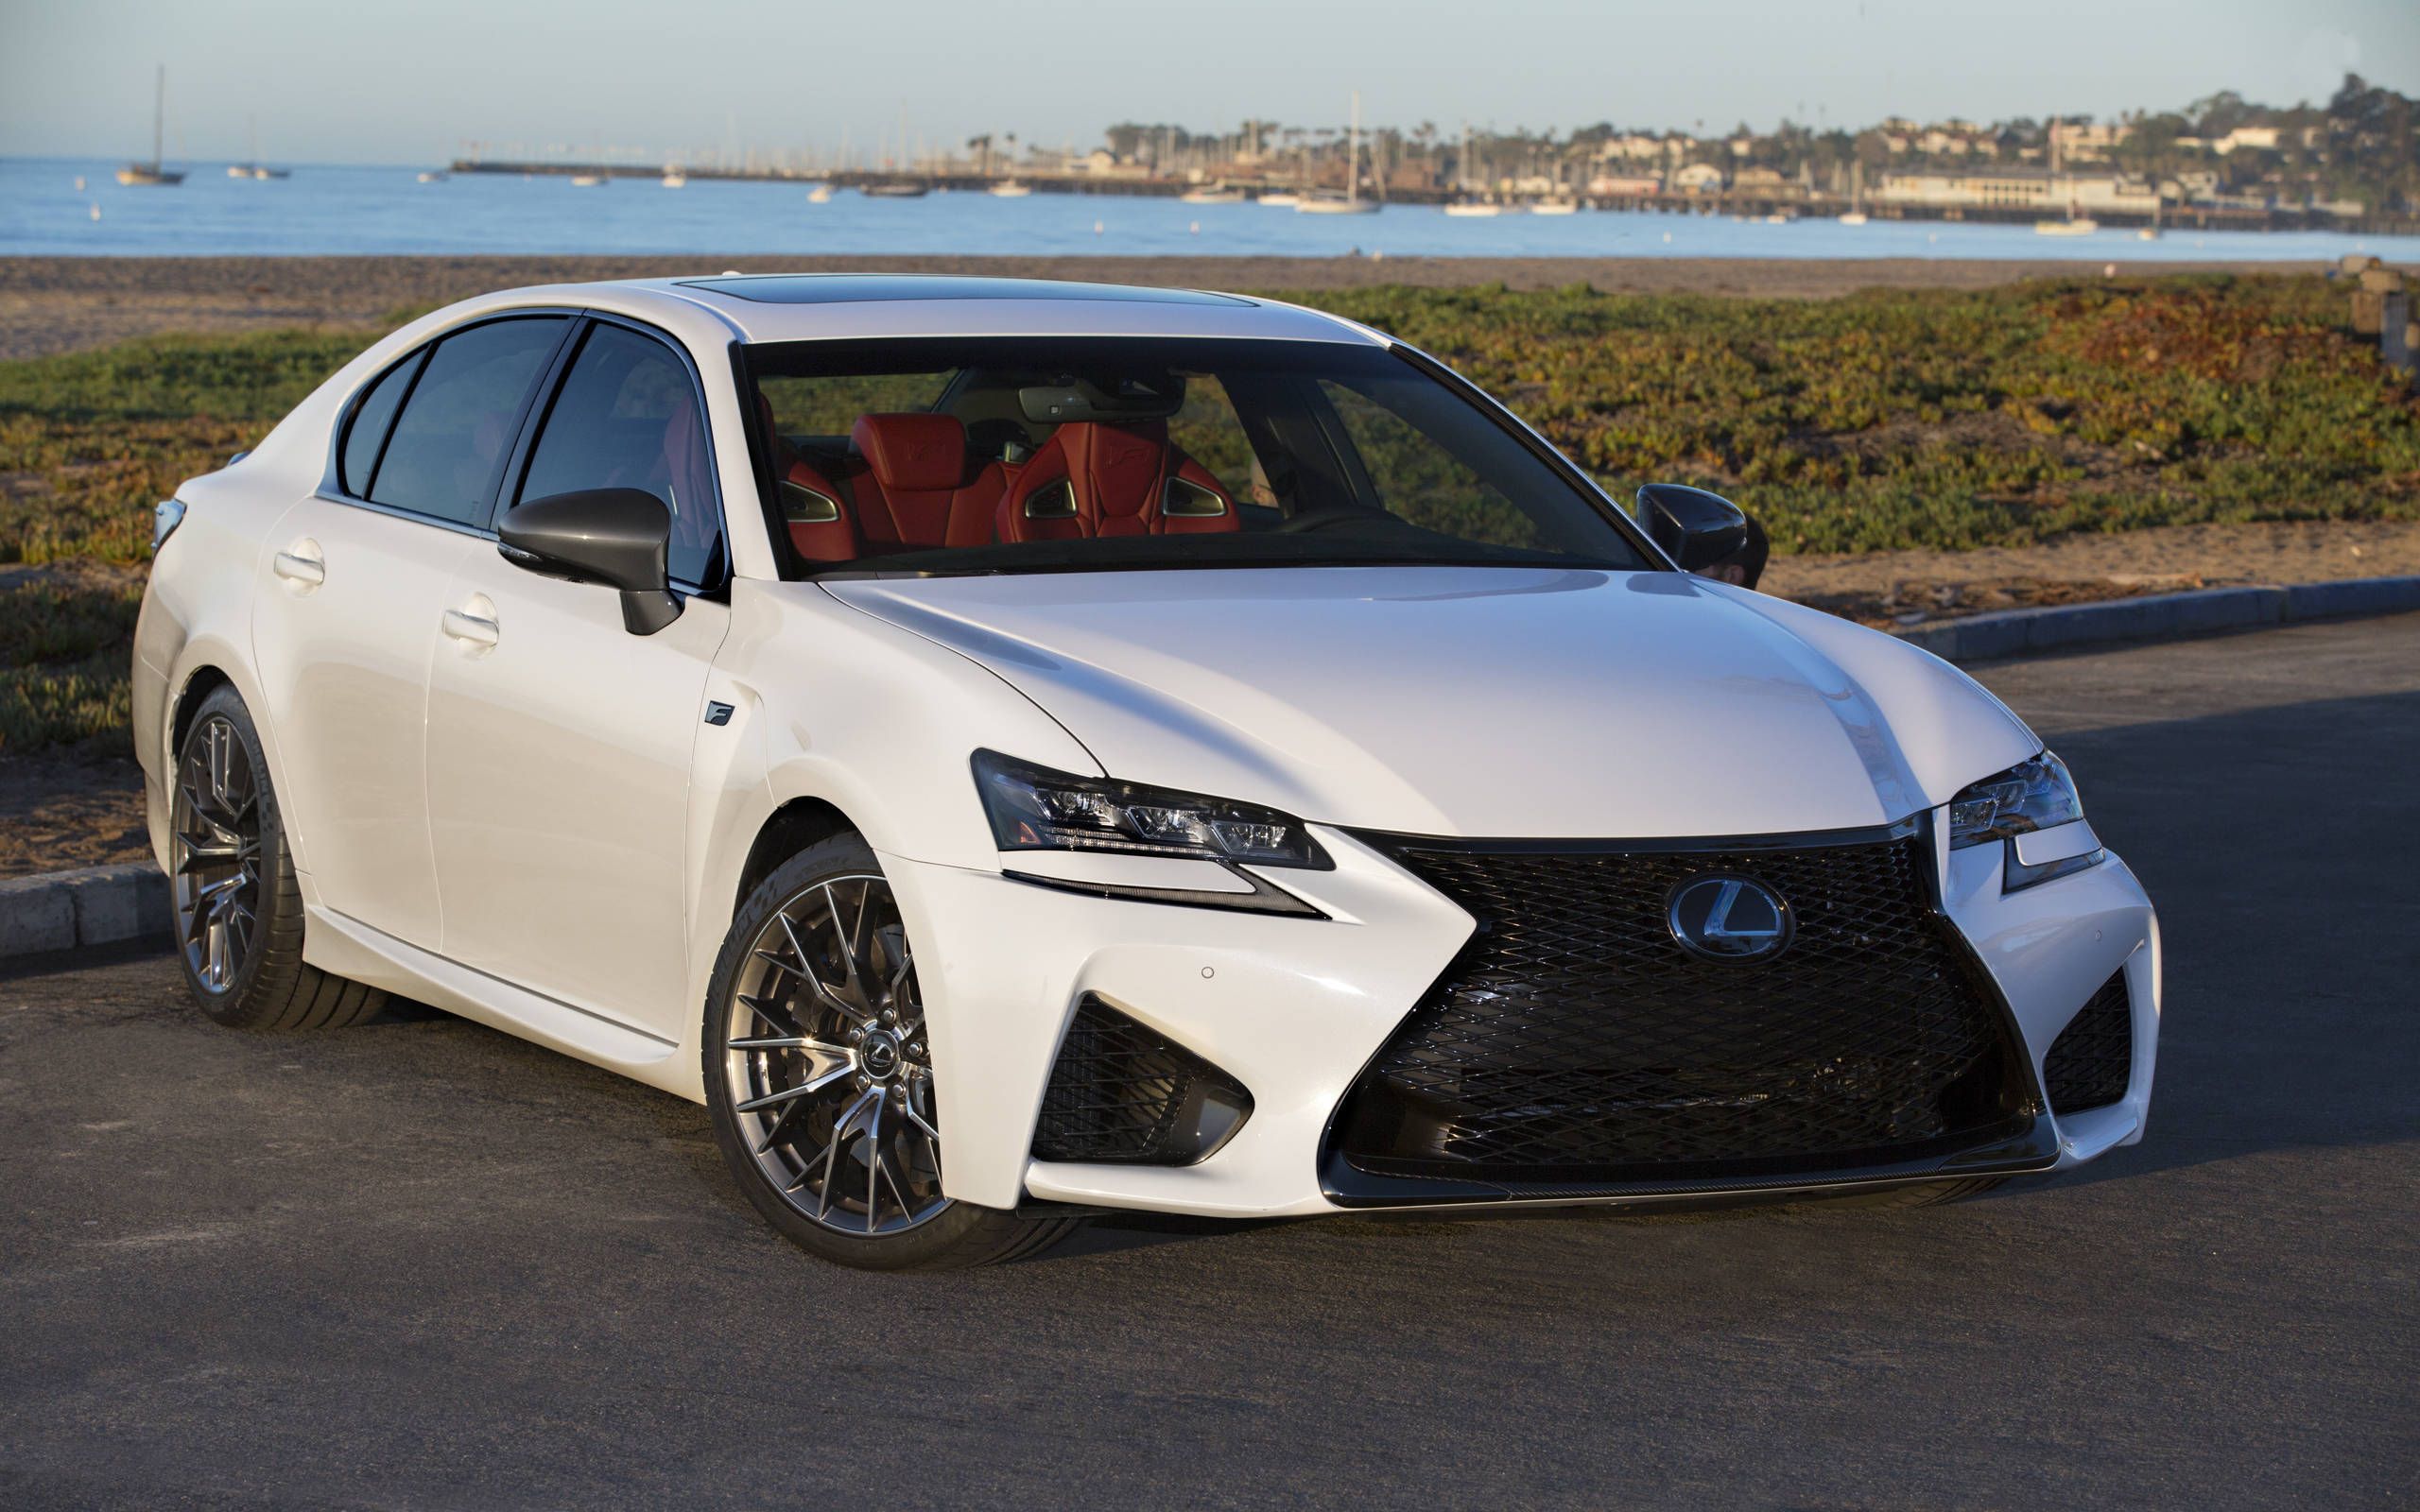 2016 Lexus GS F review: 1,600 miles and runnin'